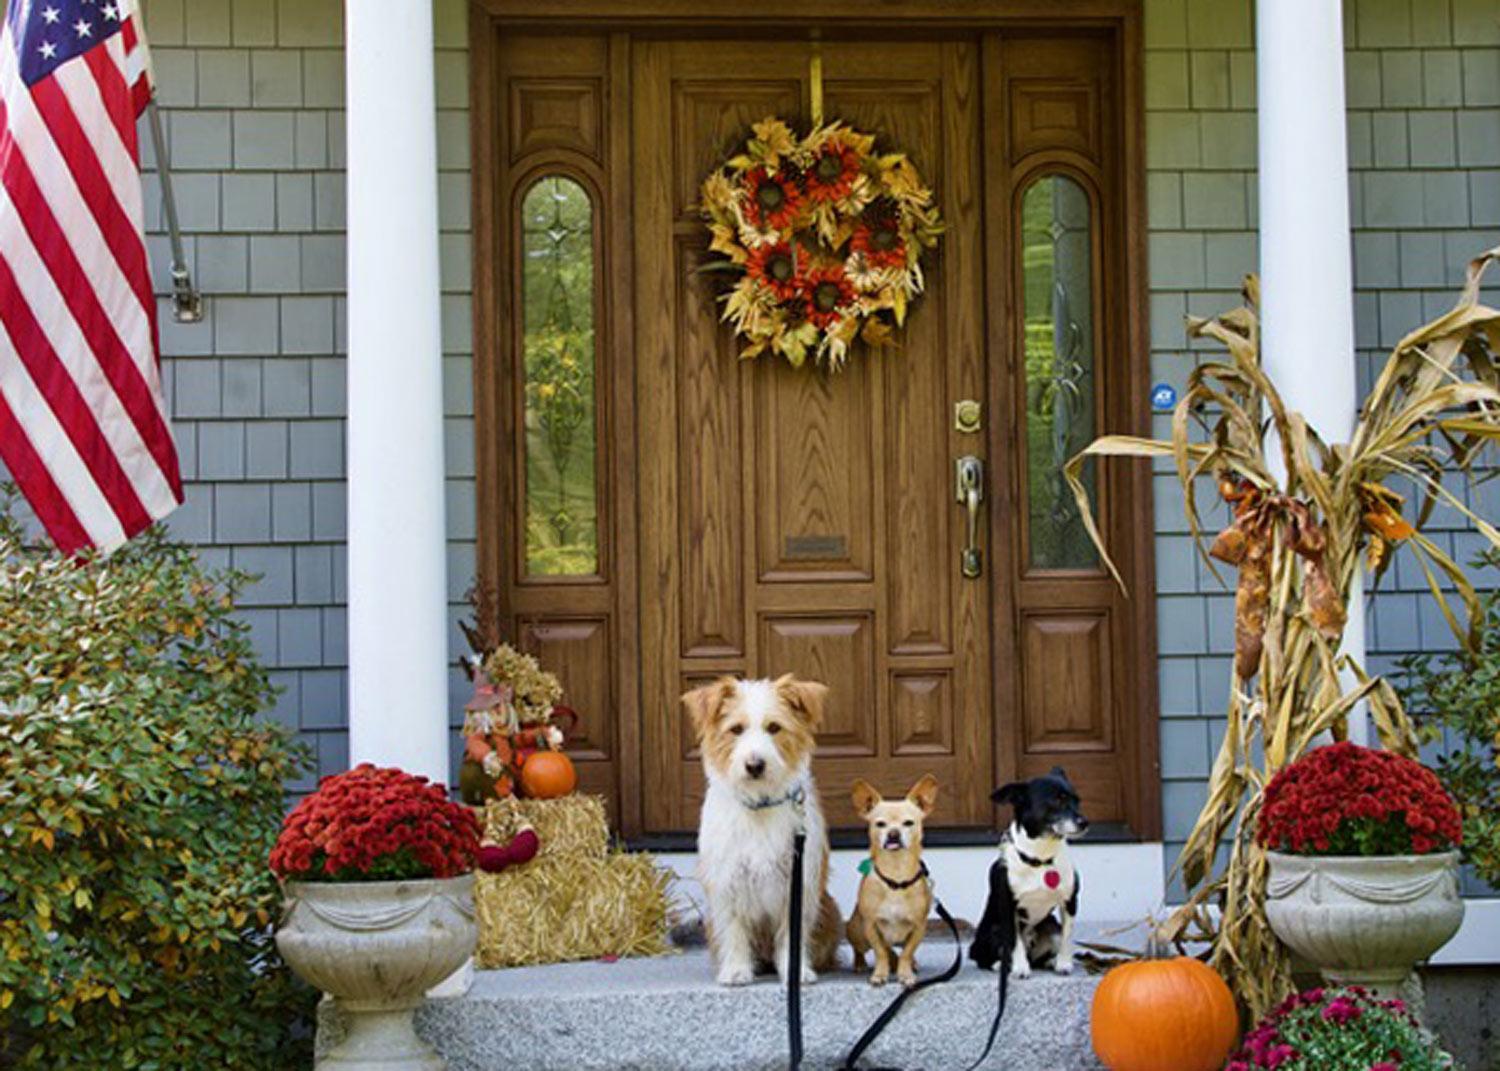 Dear readers, these are my 3 rescues sitting nice — Hobie, Nestor, and Bosco. Happy Fall! — Cheryl from NH